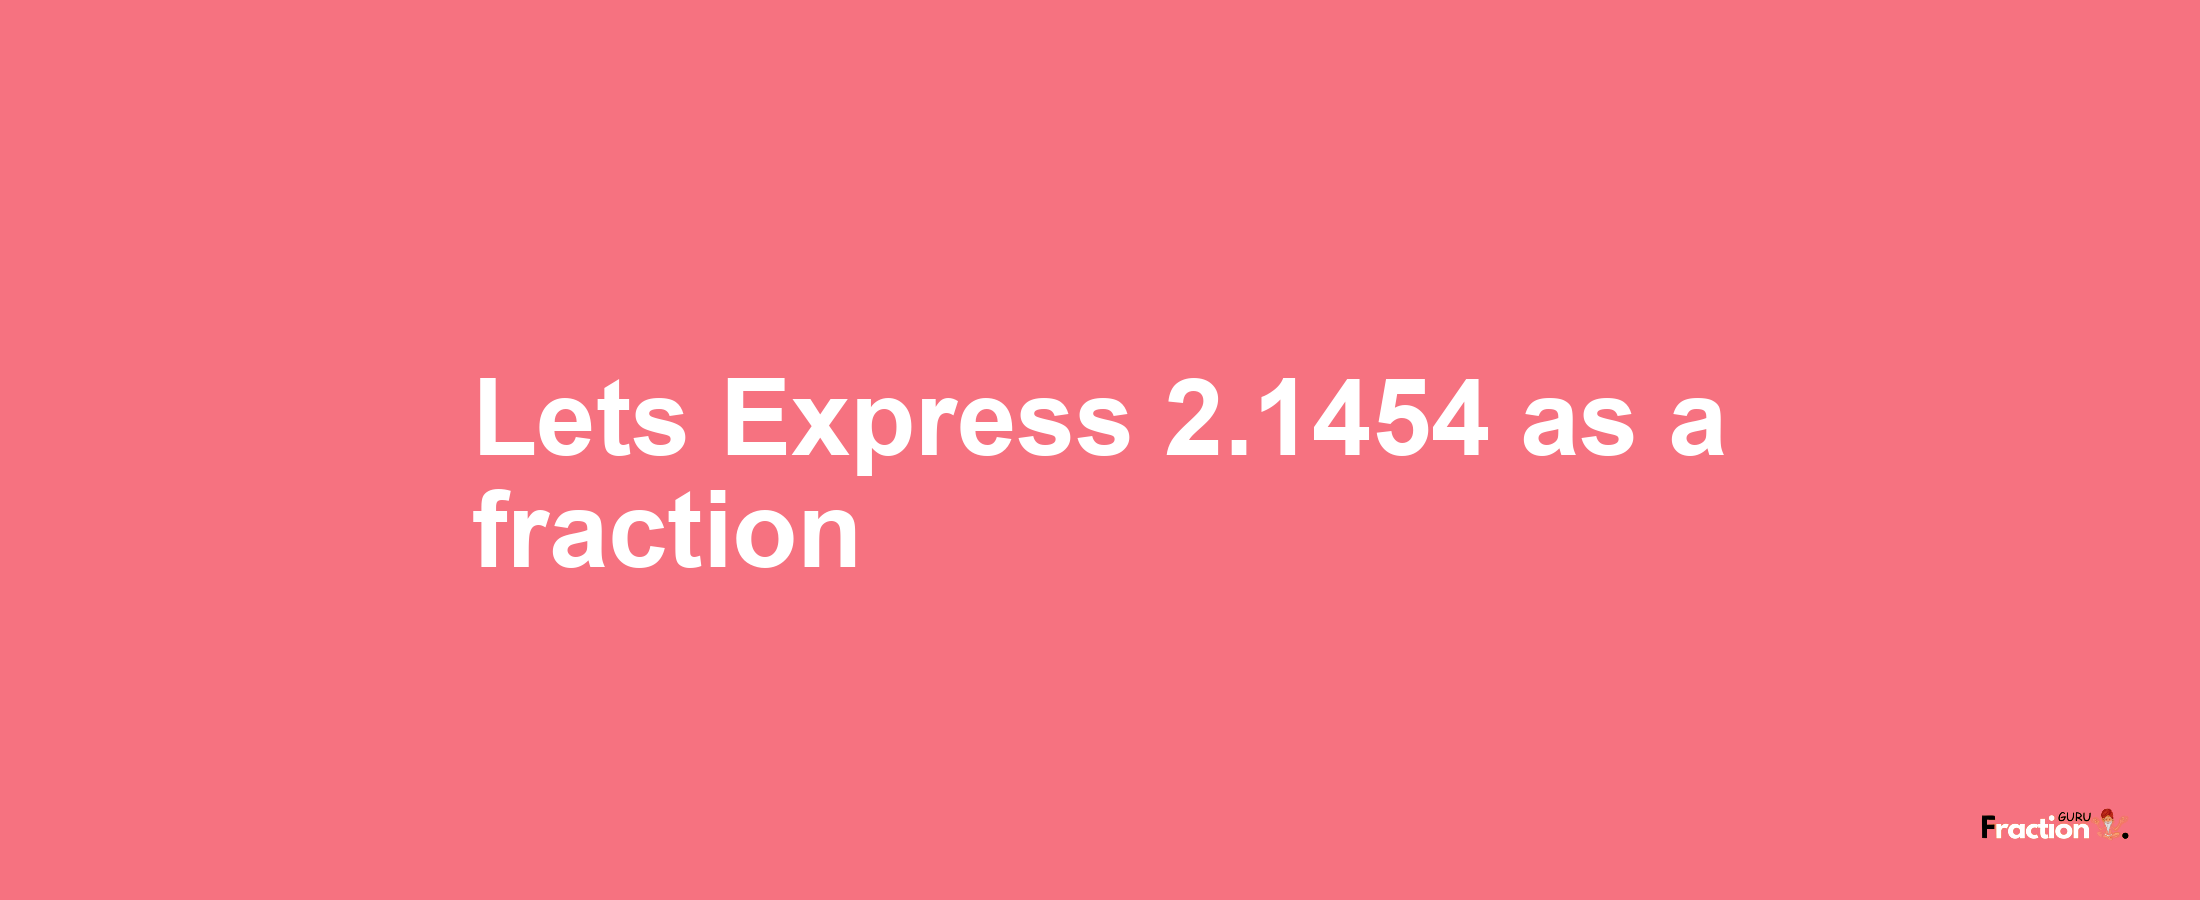 Lets Express 2.1454 as afraction